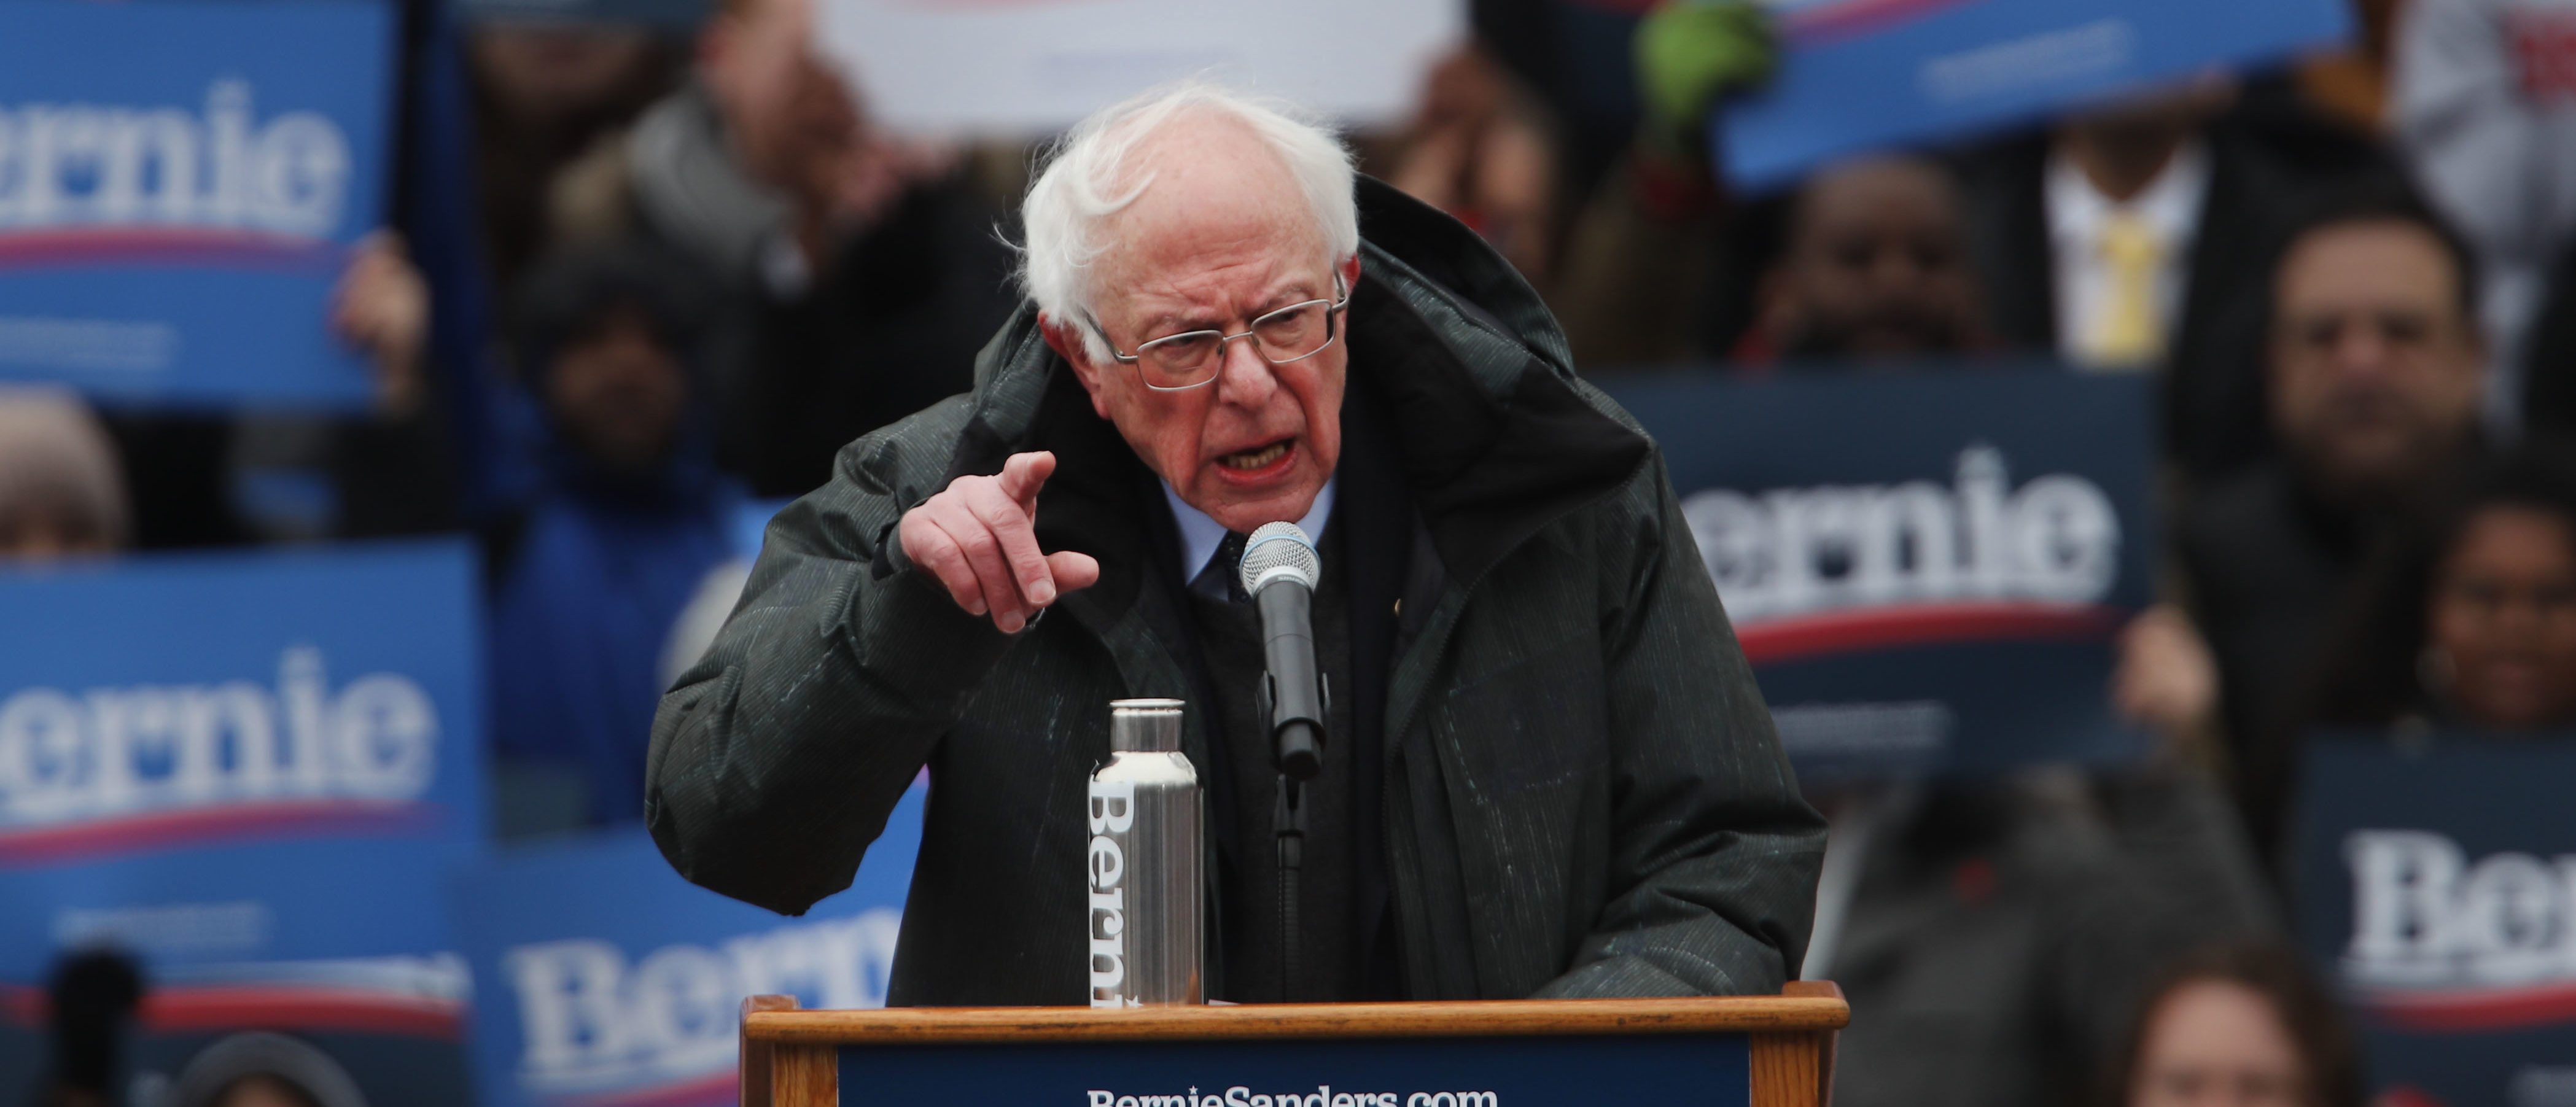 NEW YORK, NEW YORK - MARCH 02: Democratic Presidential candidate U.S. Sen. Bernie Sanders (I-VT) speaks to supporters at Brooklyn College on March 02, 2019 in the Brooklyn borough of New York City. Sanders, a staunch liberal and critic of President Donald Trump, is holding his first campaign rally of the 2020 campaign for the Democratic Party's presidential nomination in his home town of Brooklyn, New York. (Photo by Spencer Platt/Getty Images)